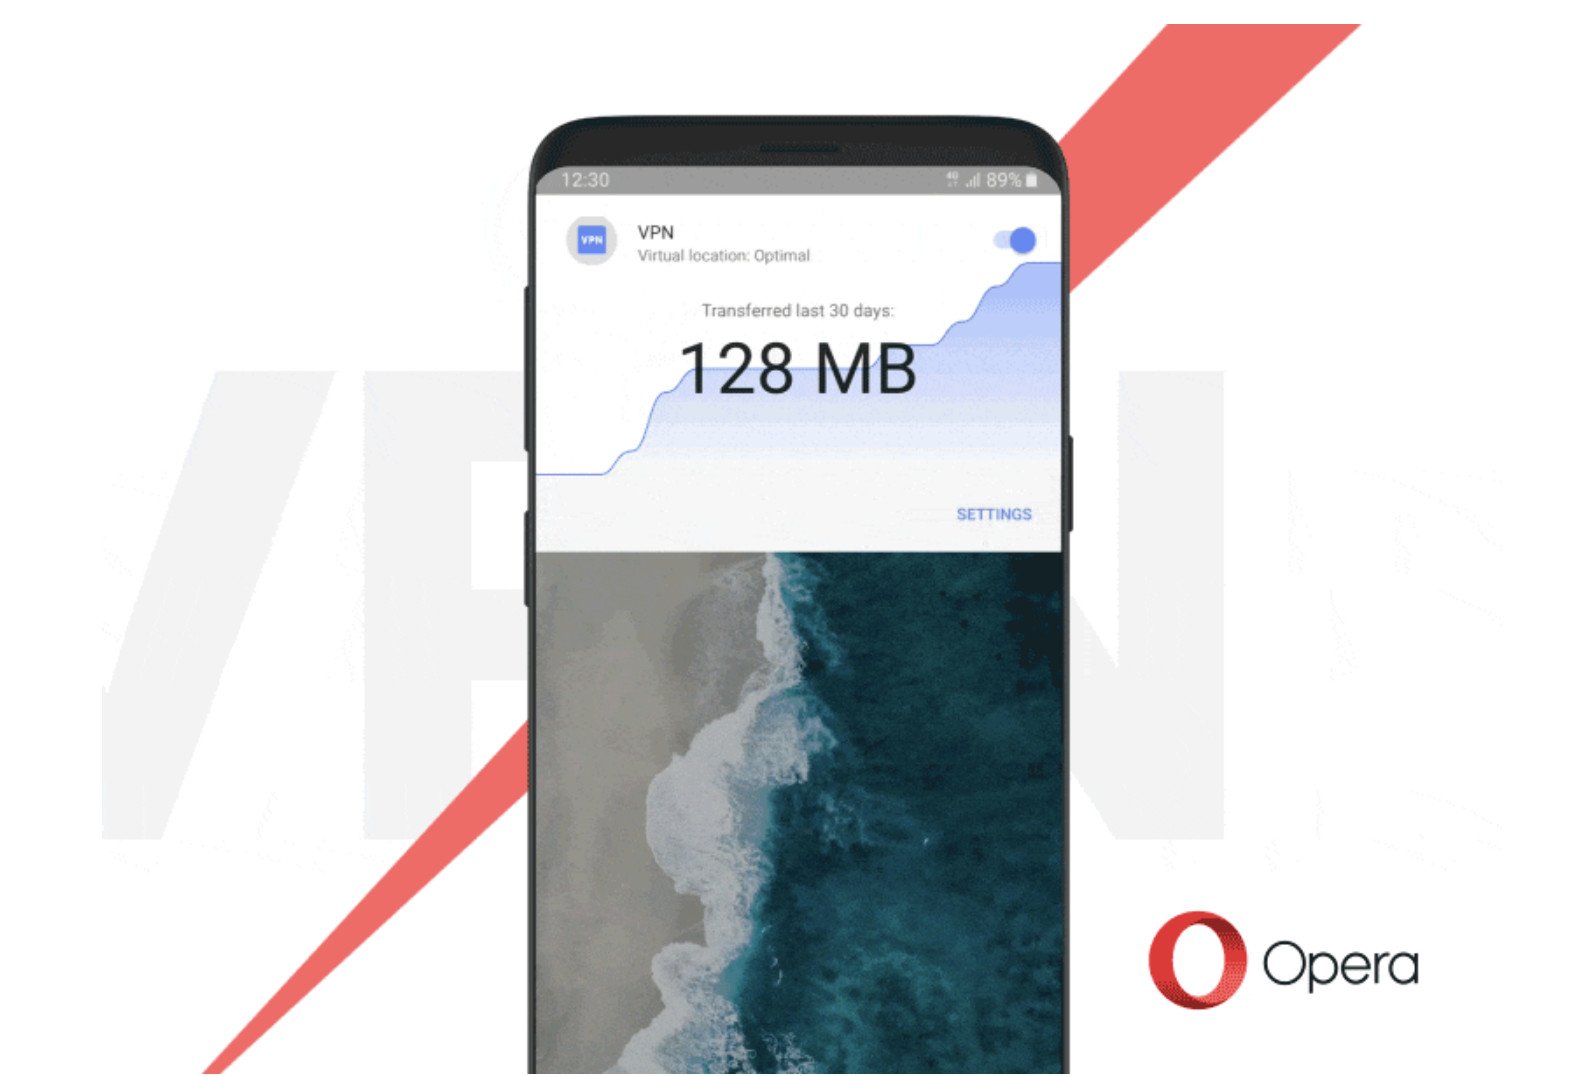 The new version of Opera for Android integrates a free unlimited VPN